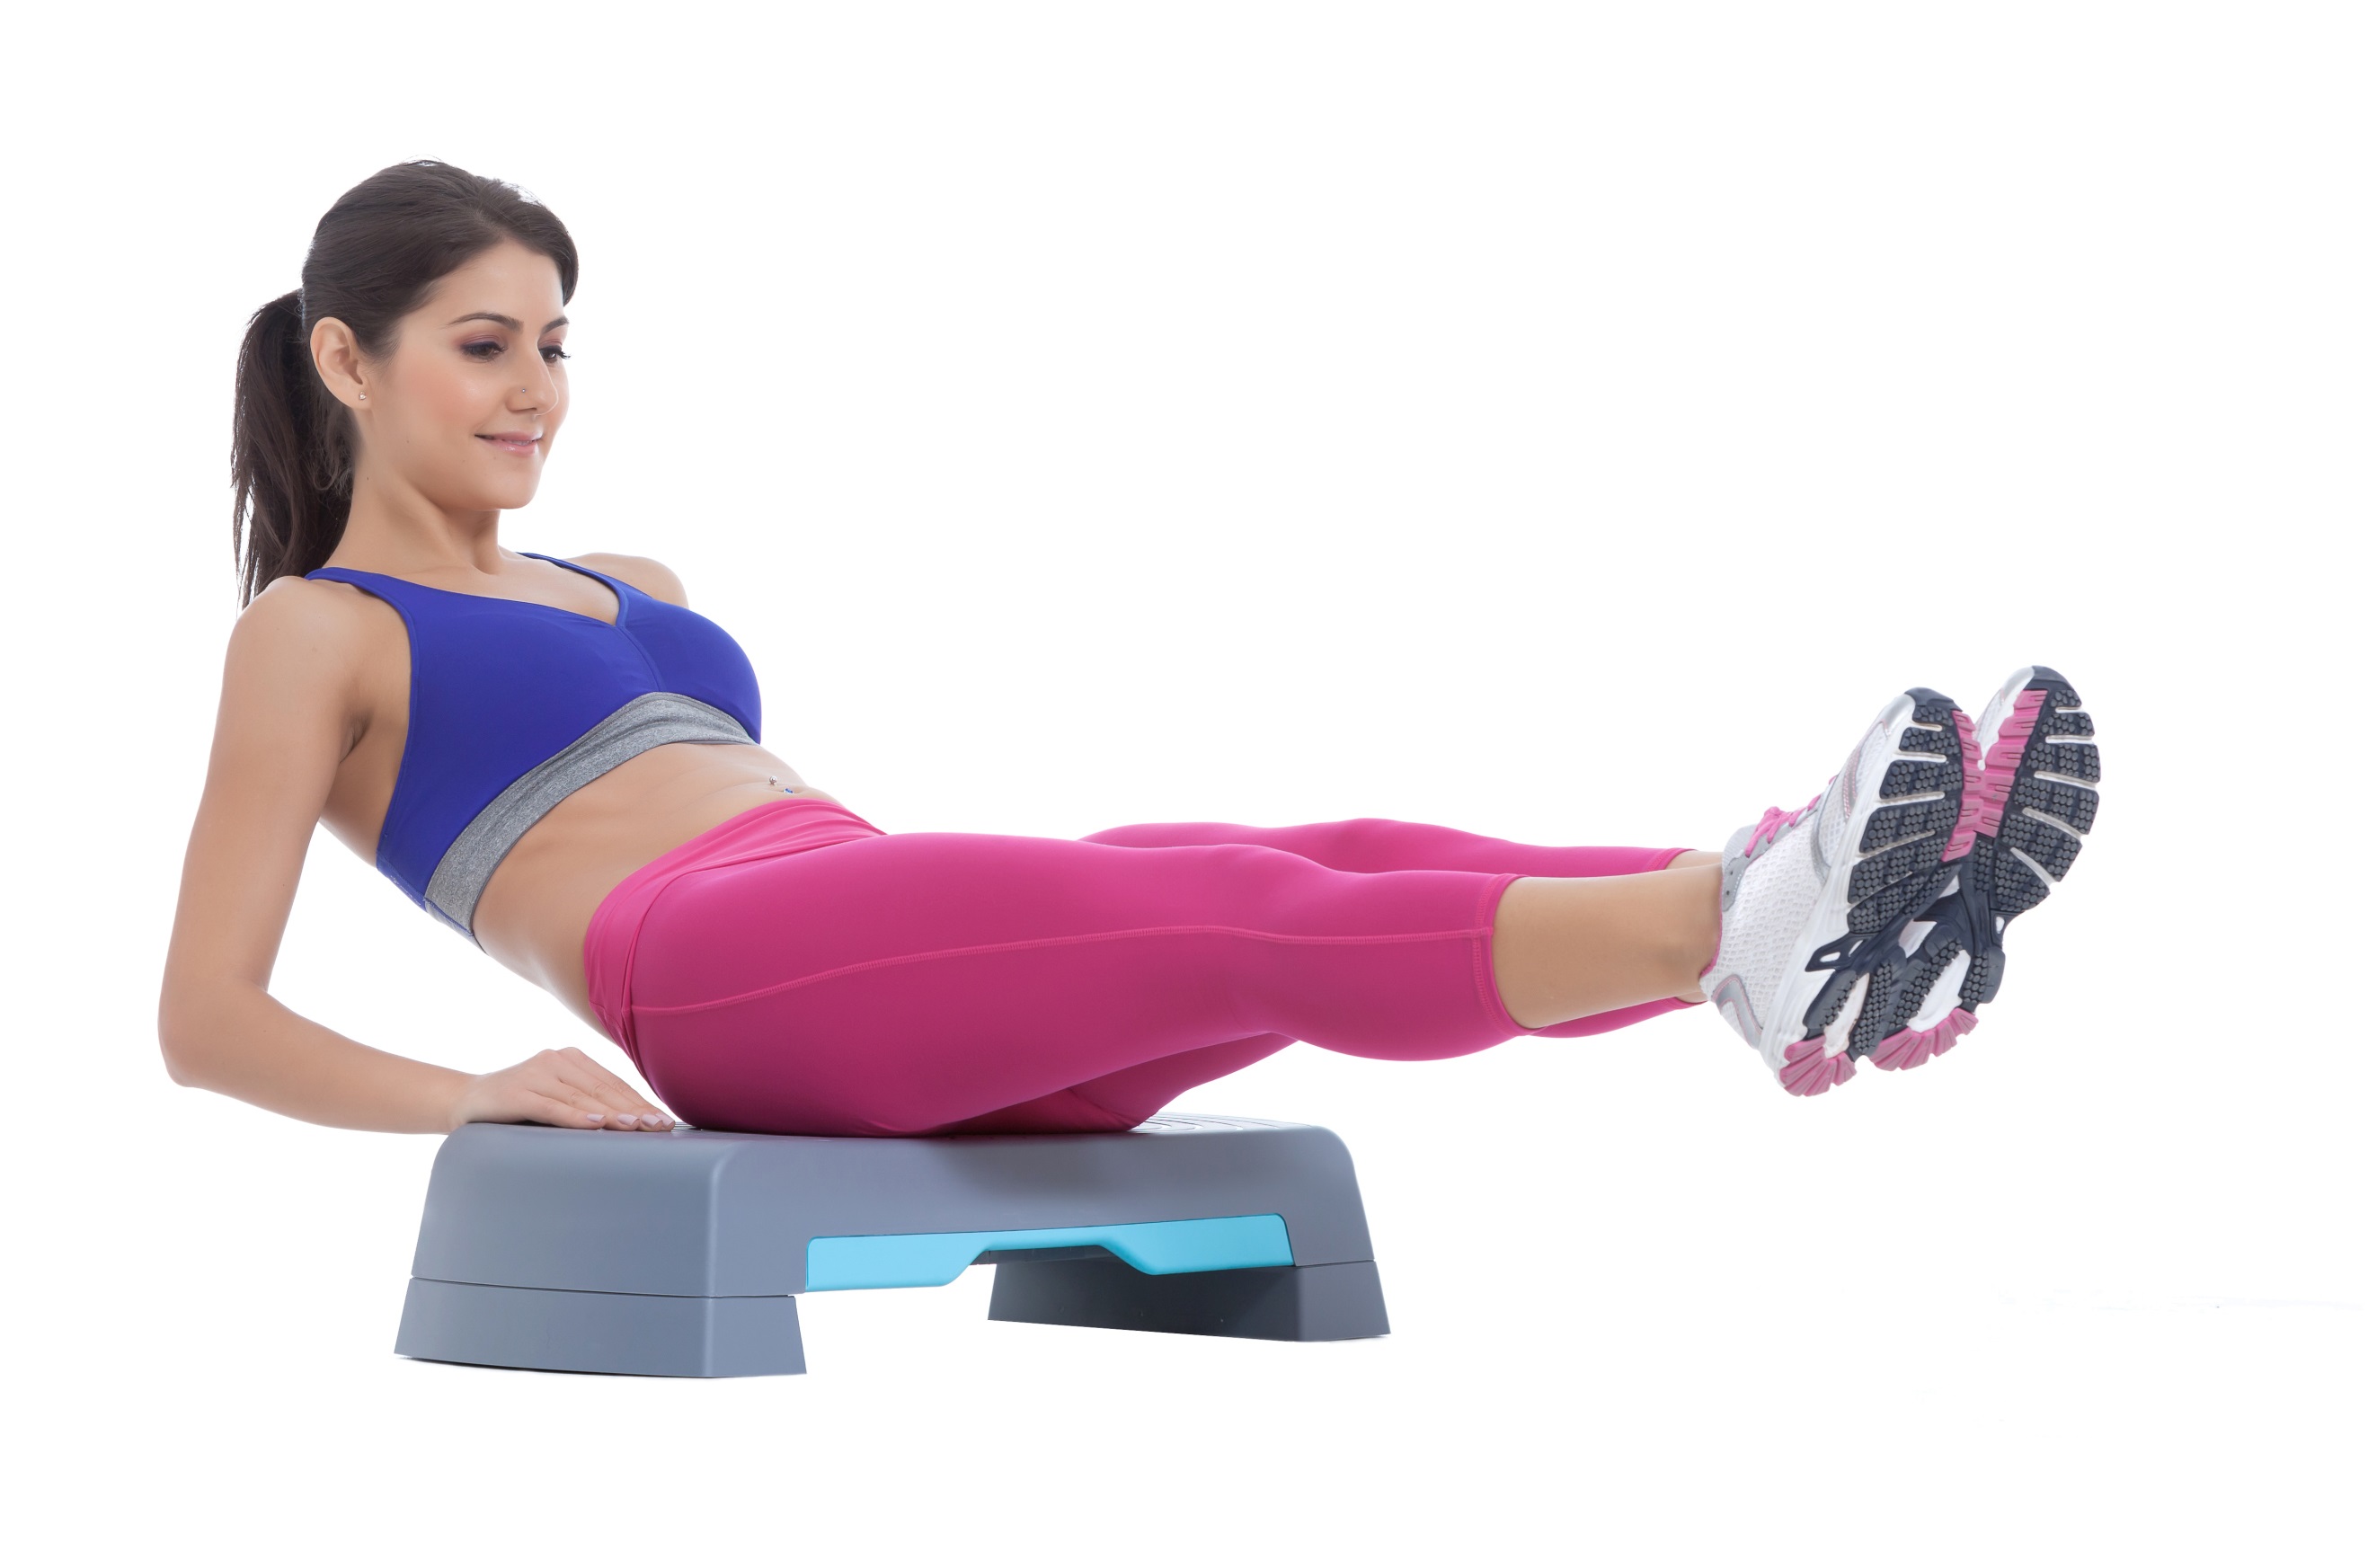 crunches exercise steps